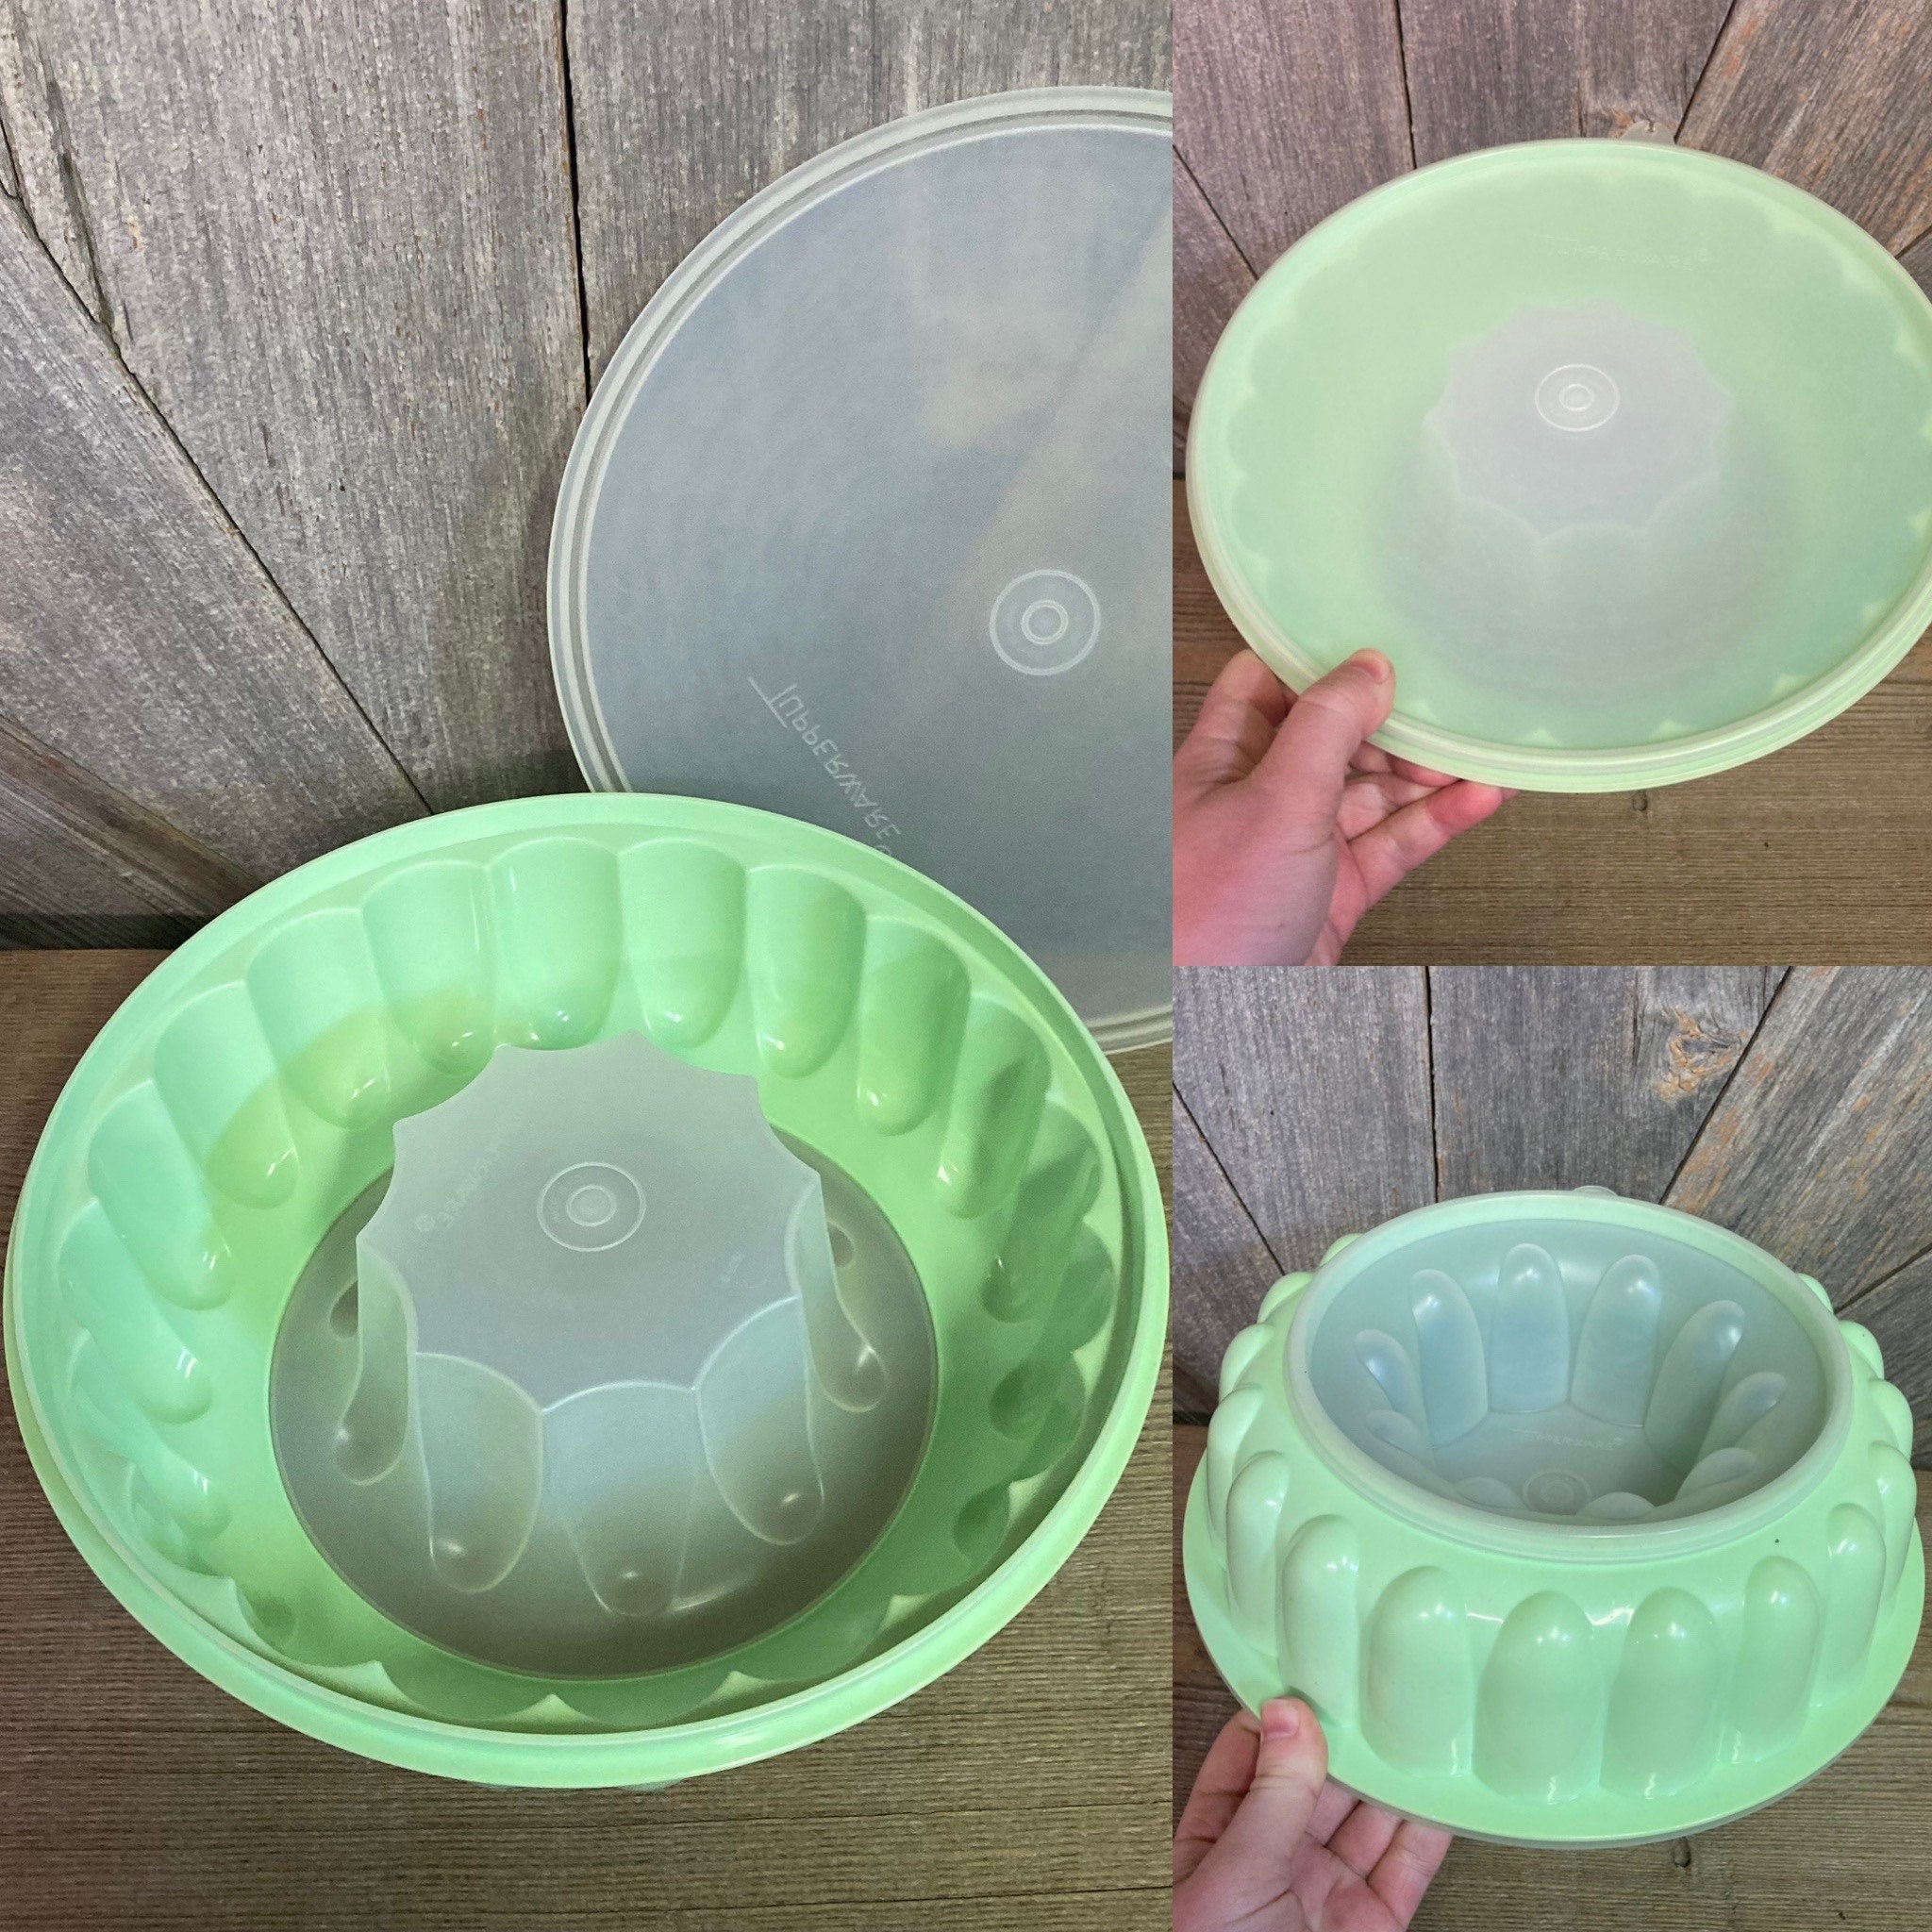 Lounies Soap Co. - Super cute Jello molds. Tupperware is awesome and you  can order in store! #tupperware #reusable #ecofriendly #lounies  #downtownporthuron #shopsmall